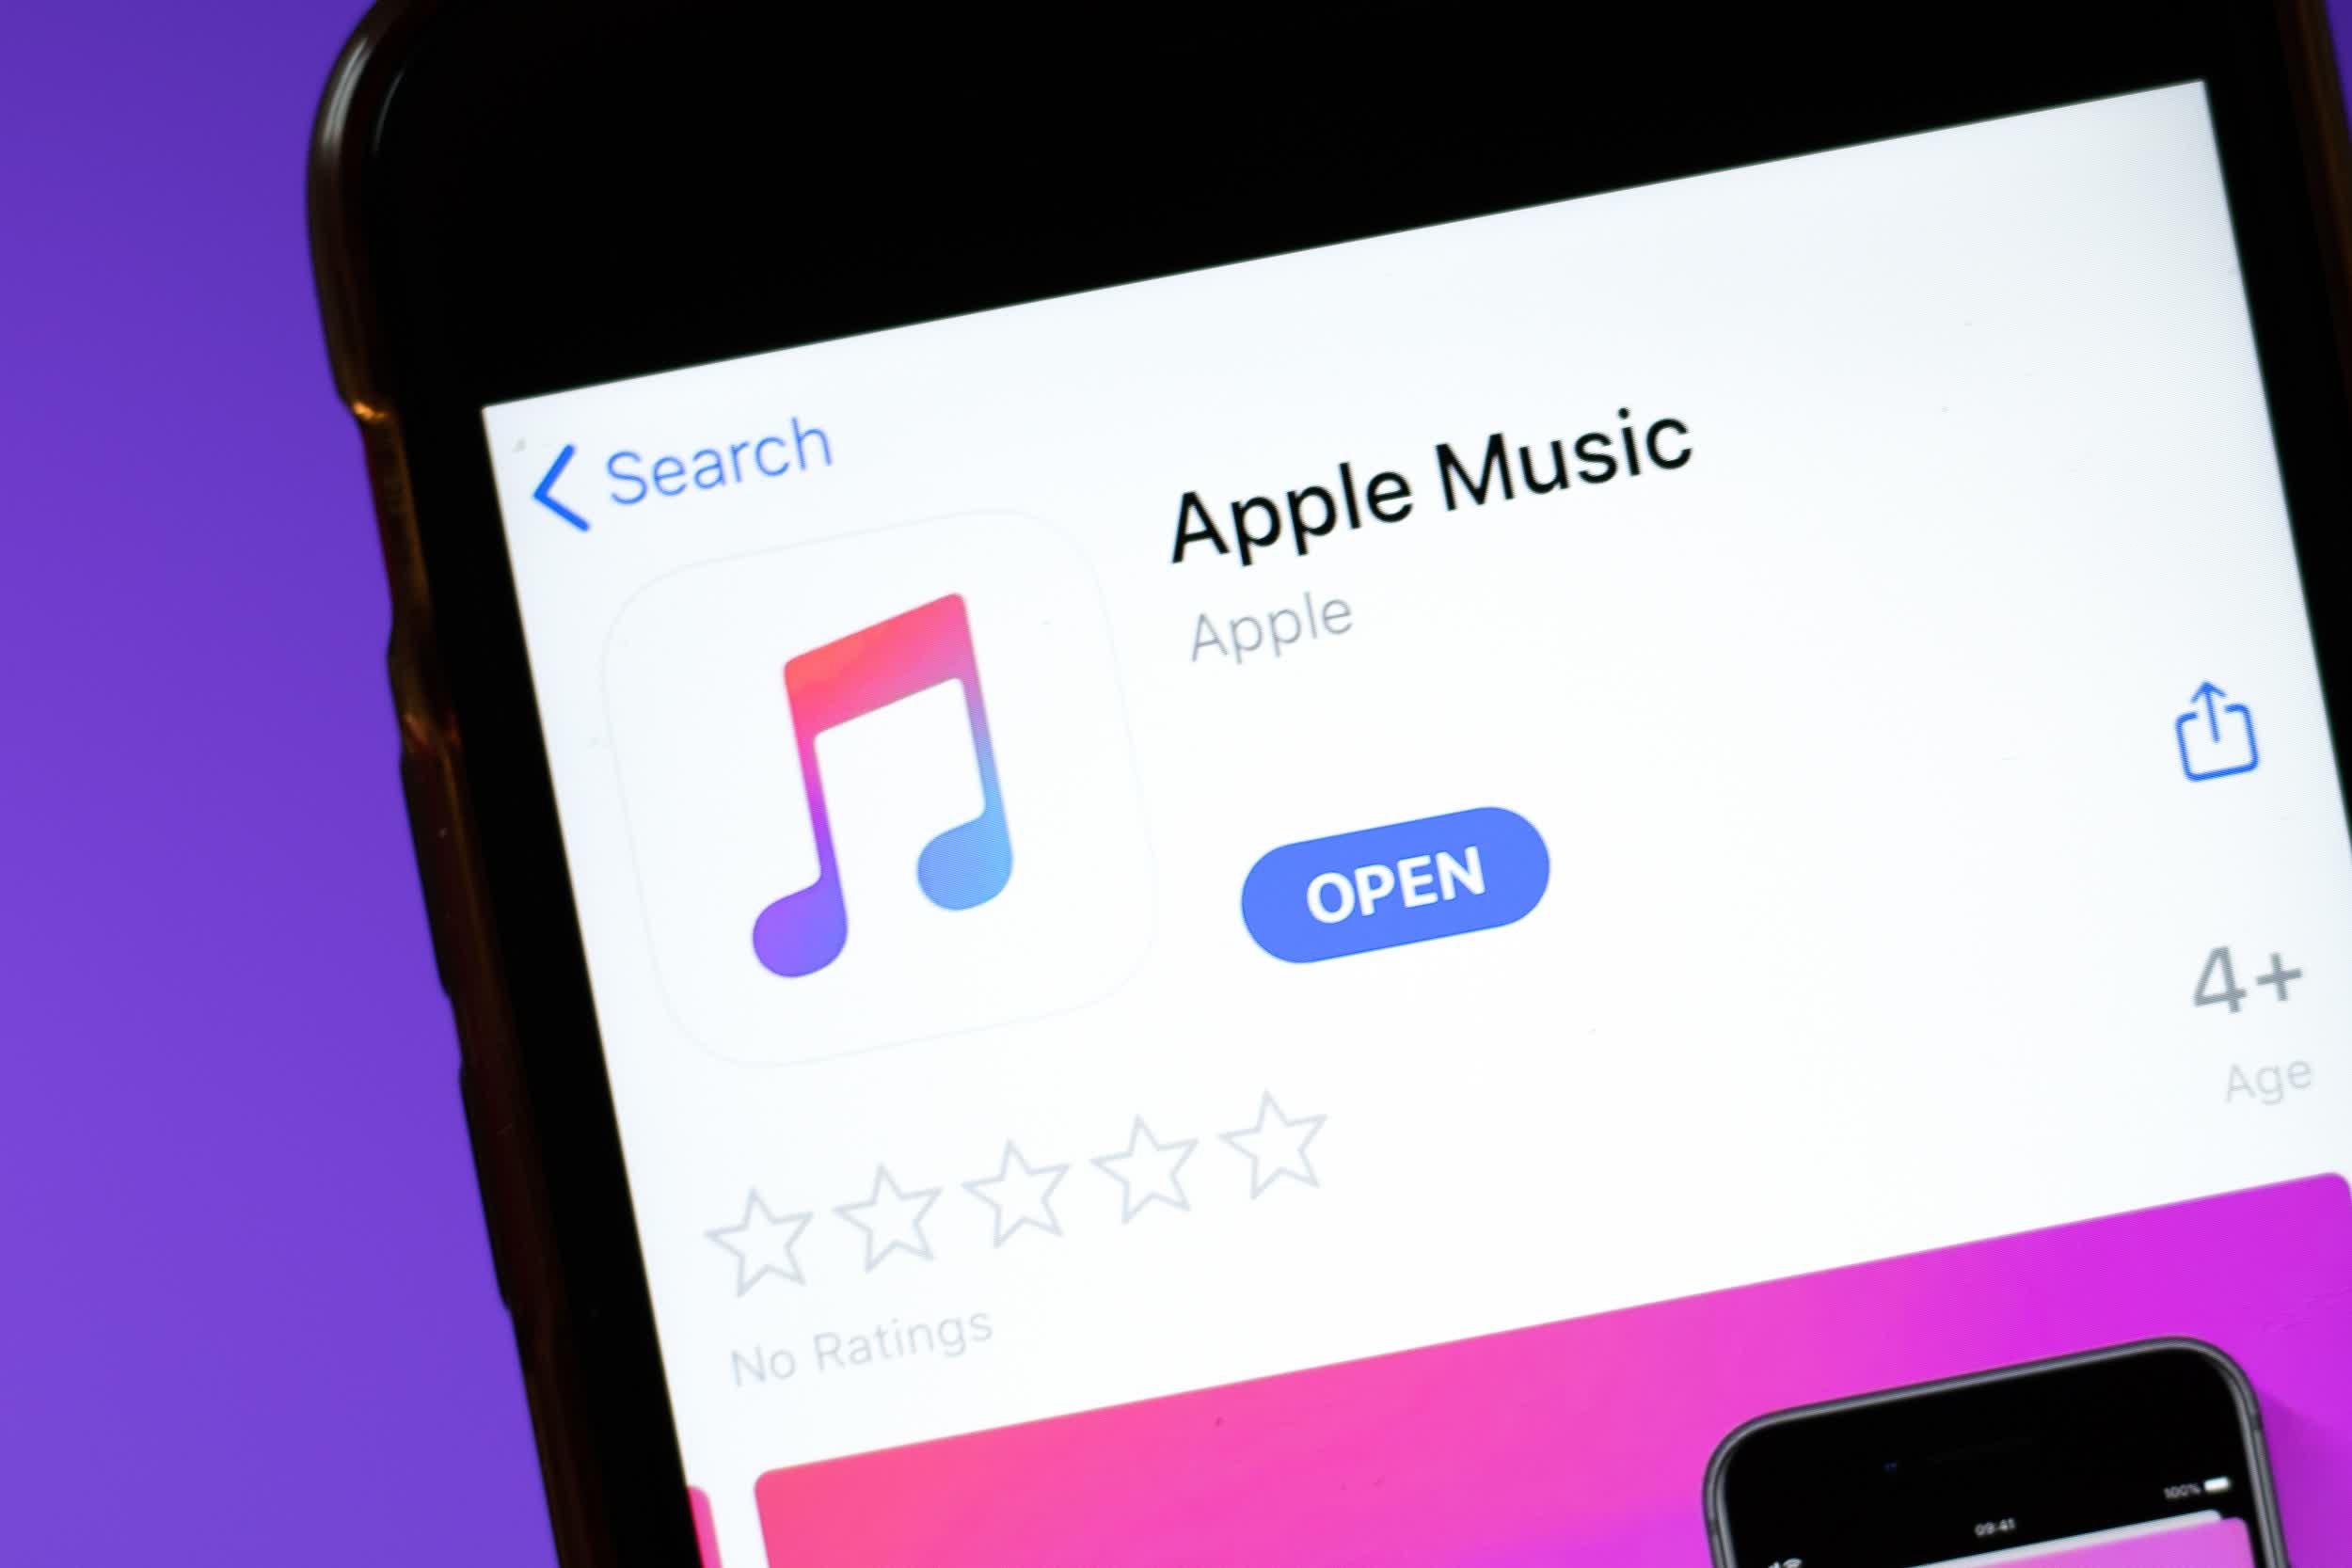 Lossless audio among new features heading to Apple Music next month